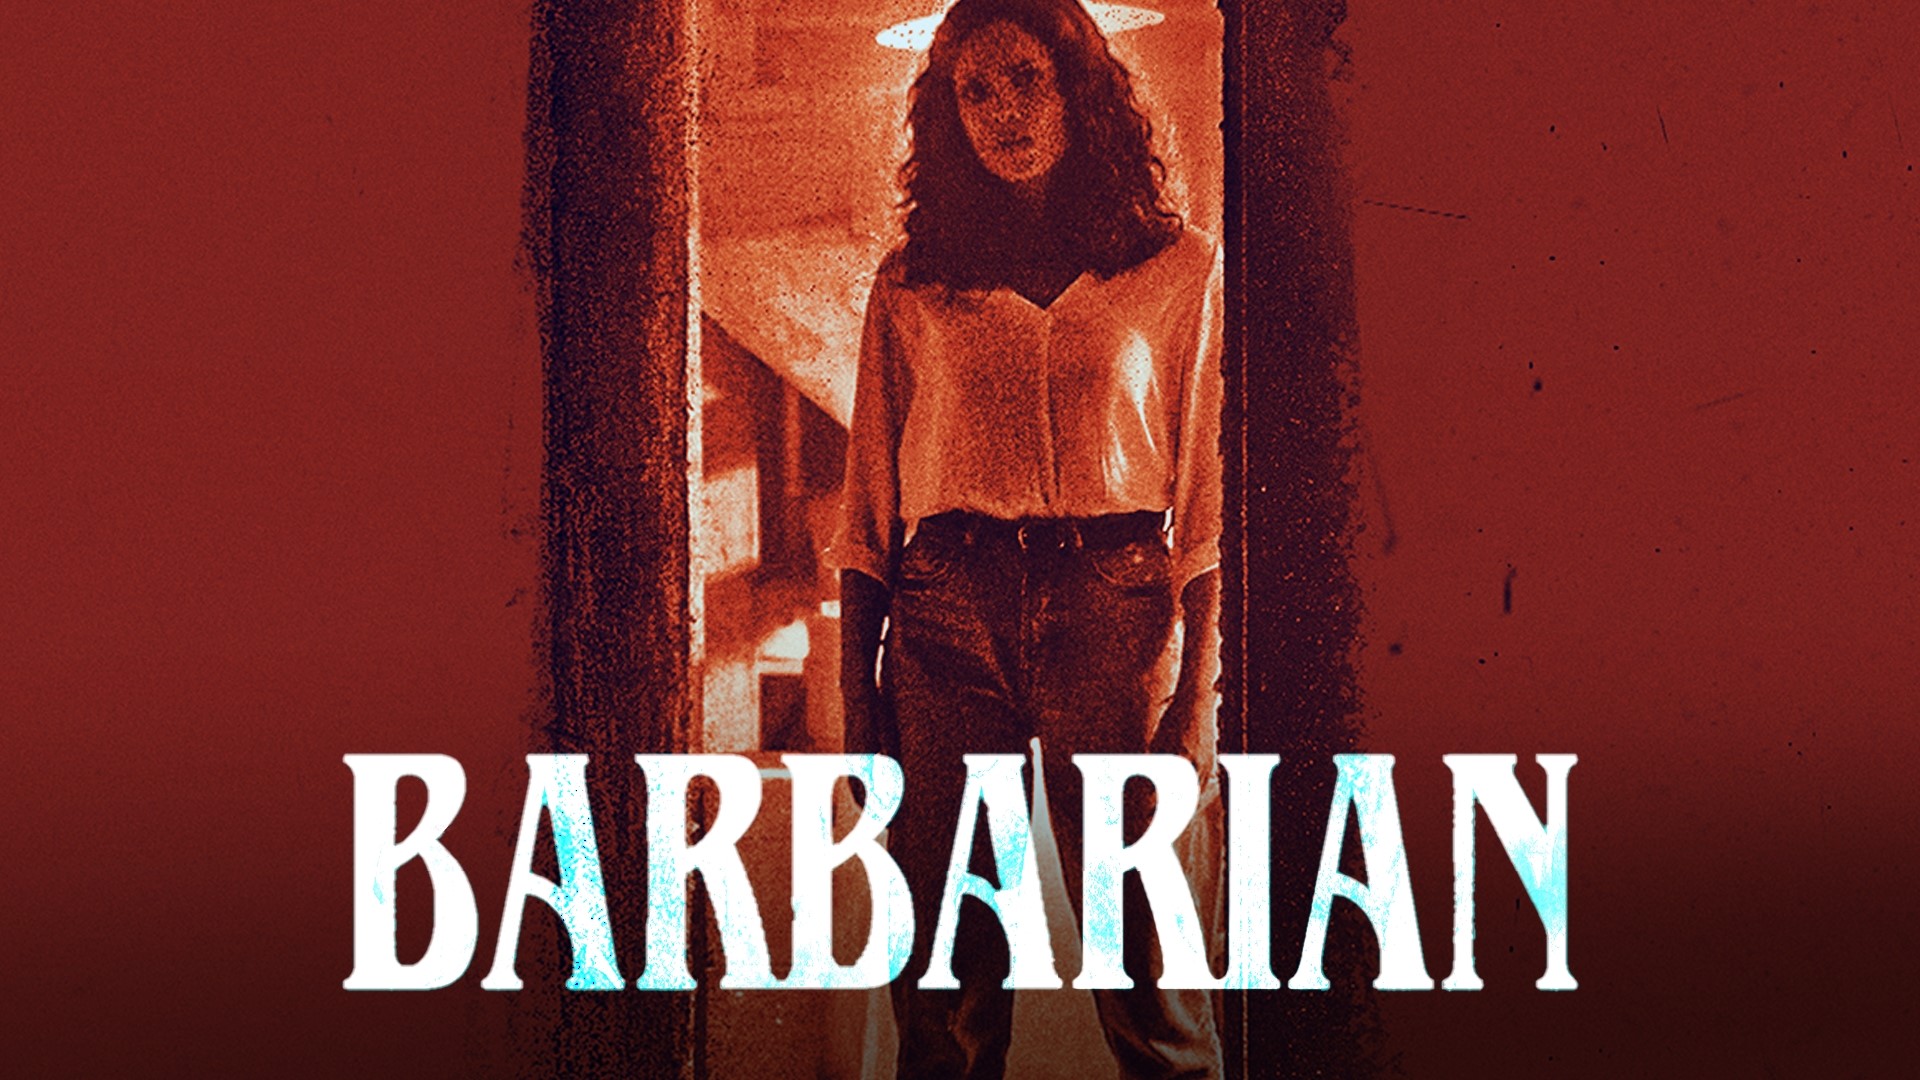 Barbarian is the year's best horror movie where you're not supposed to spoil what makes it great...so we talked spoilers of course. You've been warned.